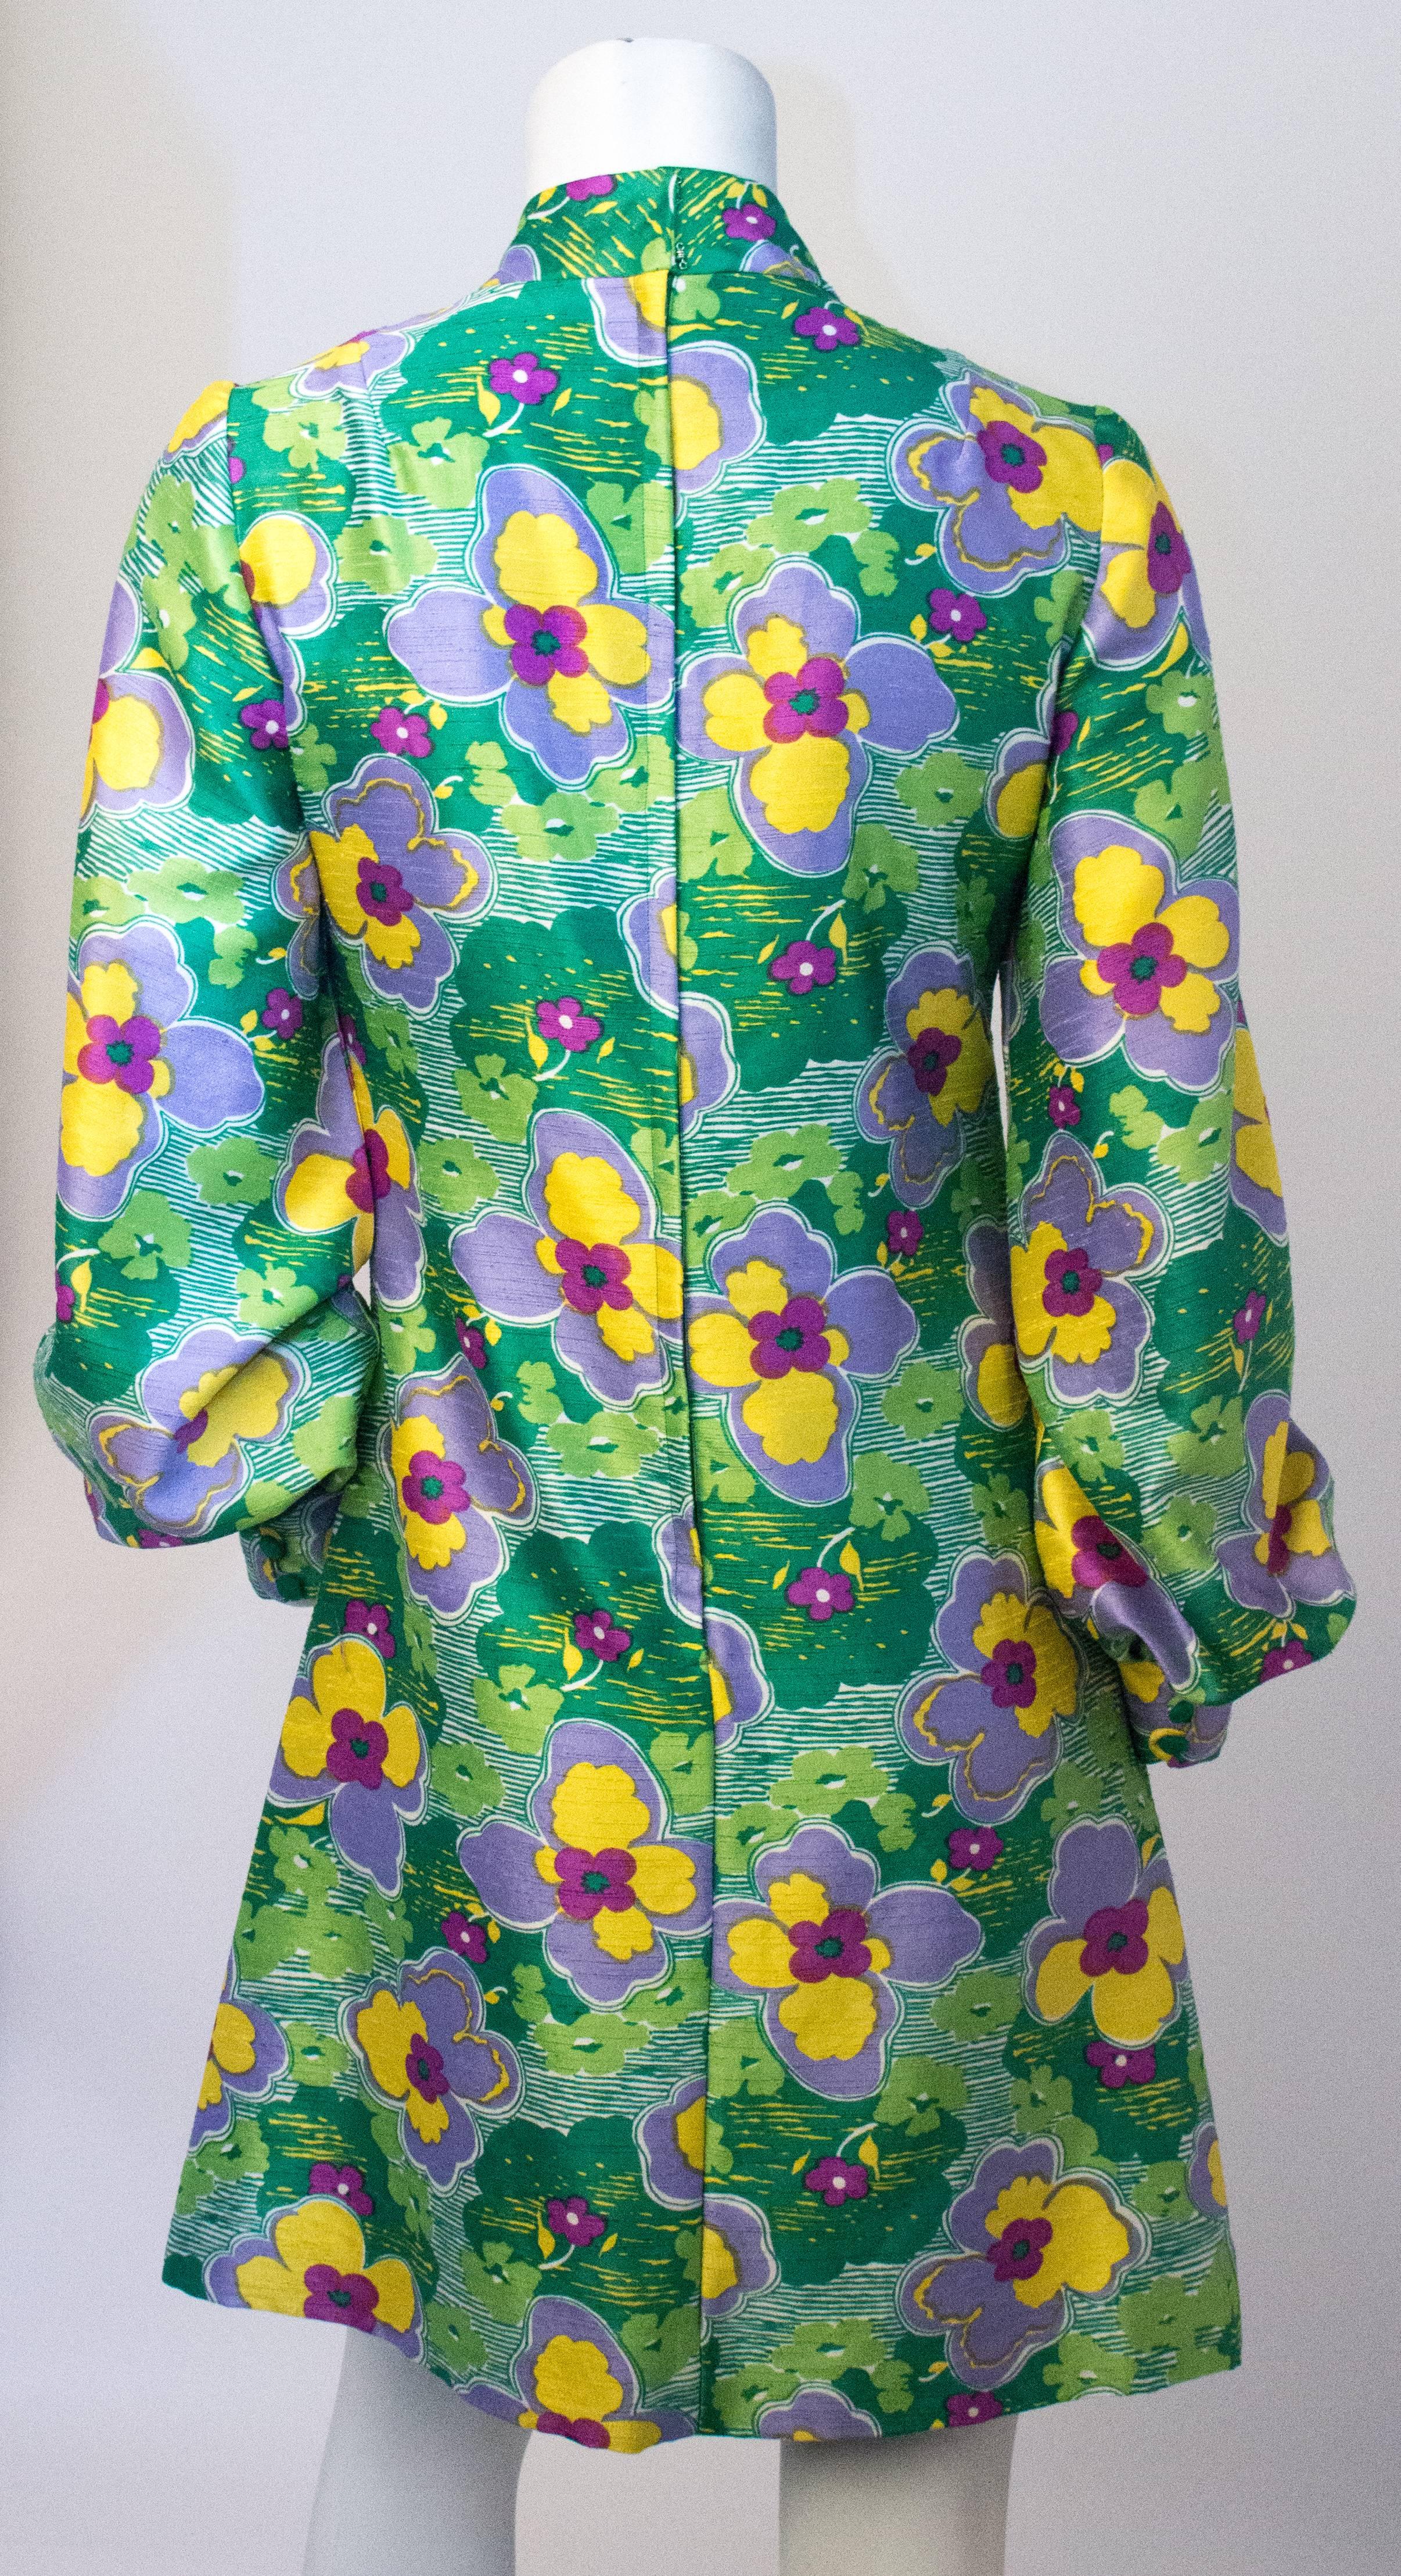 60s Green & Purple Flower Bishop Sleeve Mini Dress. Small slit in center front seam of dress. Sleeves have three covered buttons to open or close cuff. Handmade. Fully lined. Zips up the back. 

